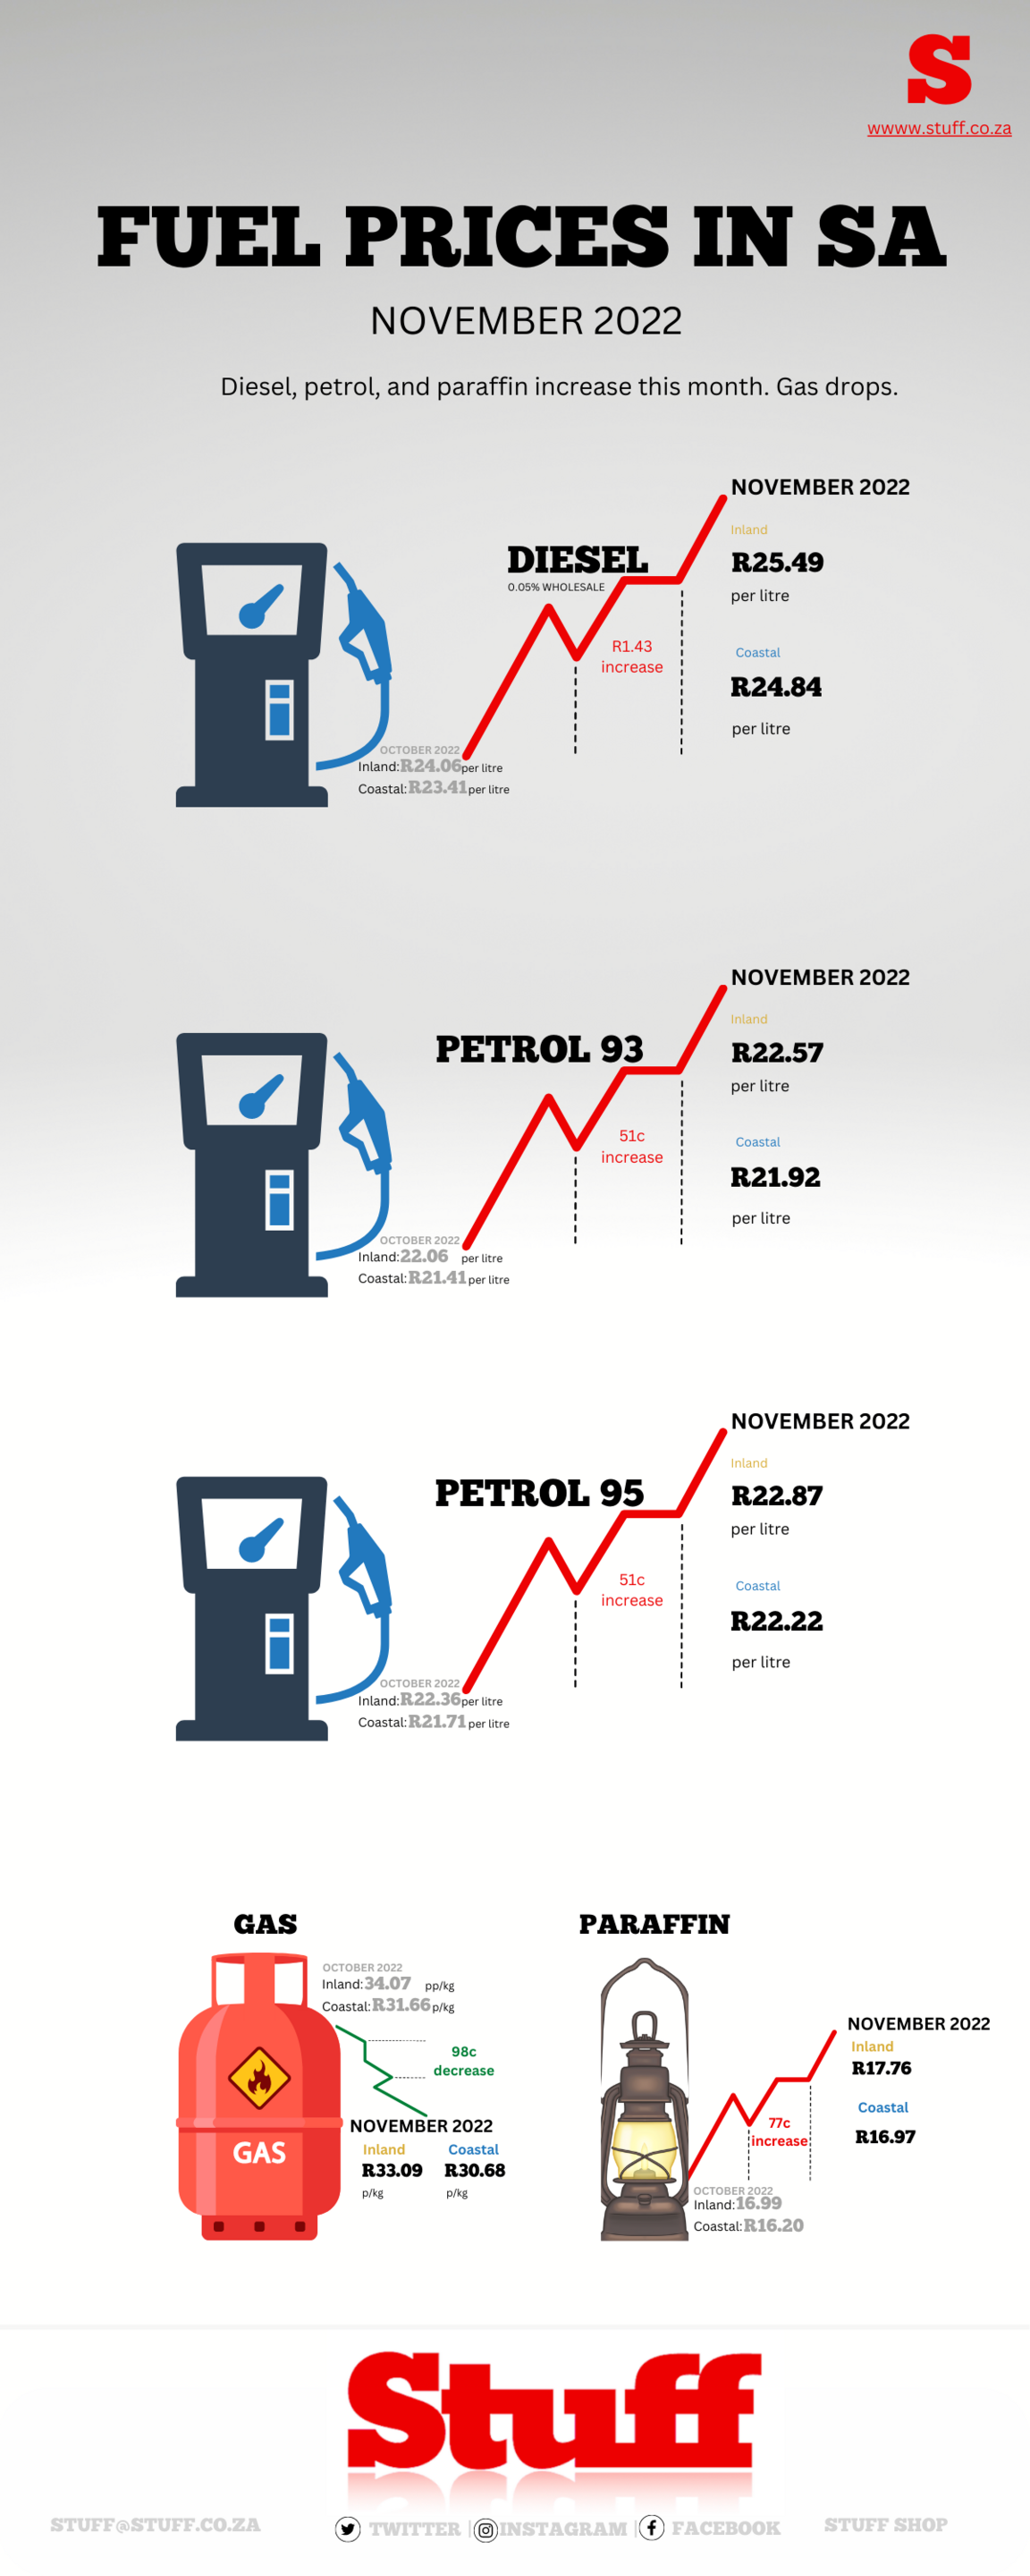 Fuel prices for November 2022